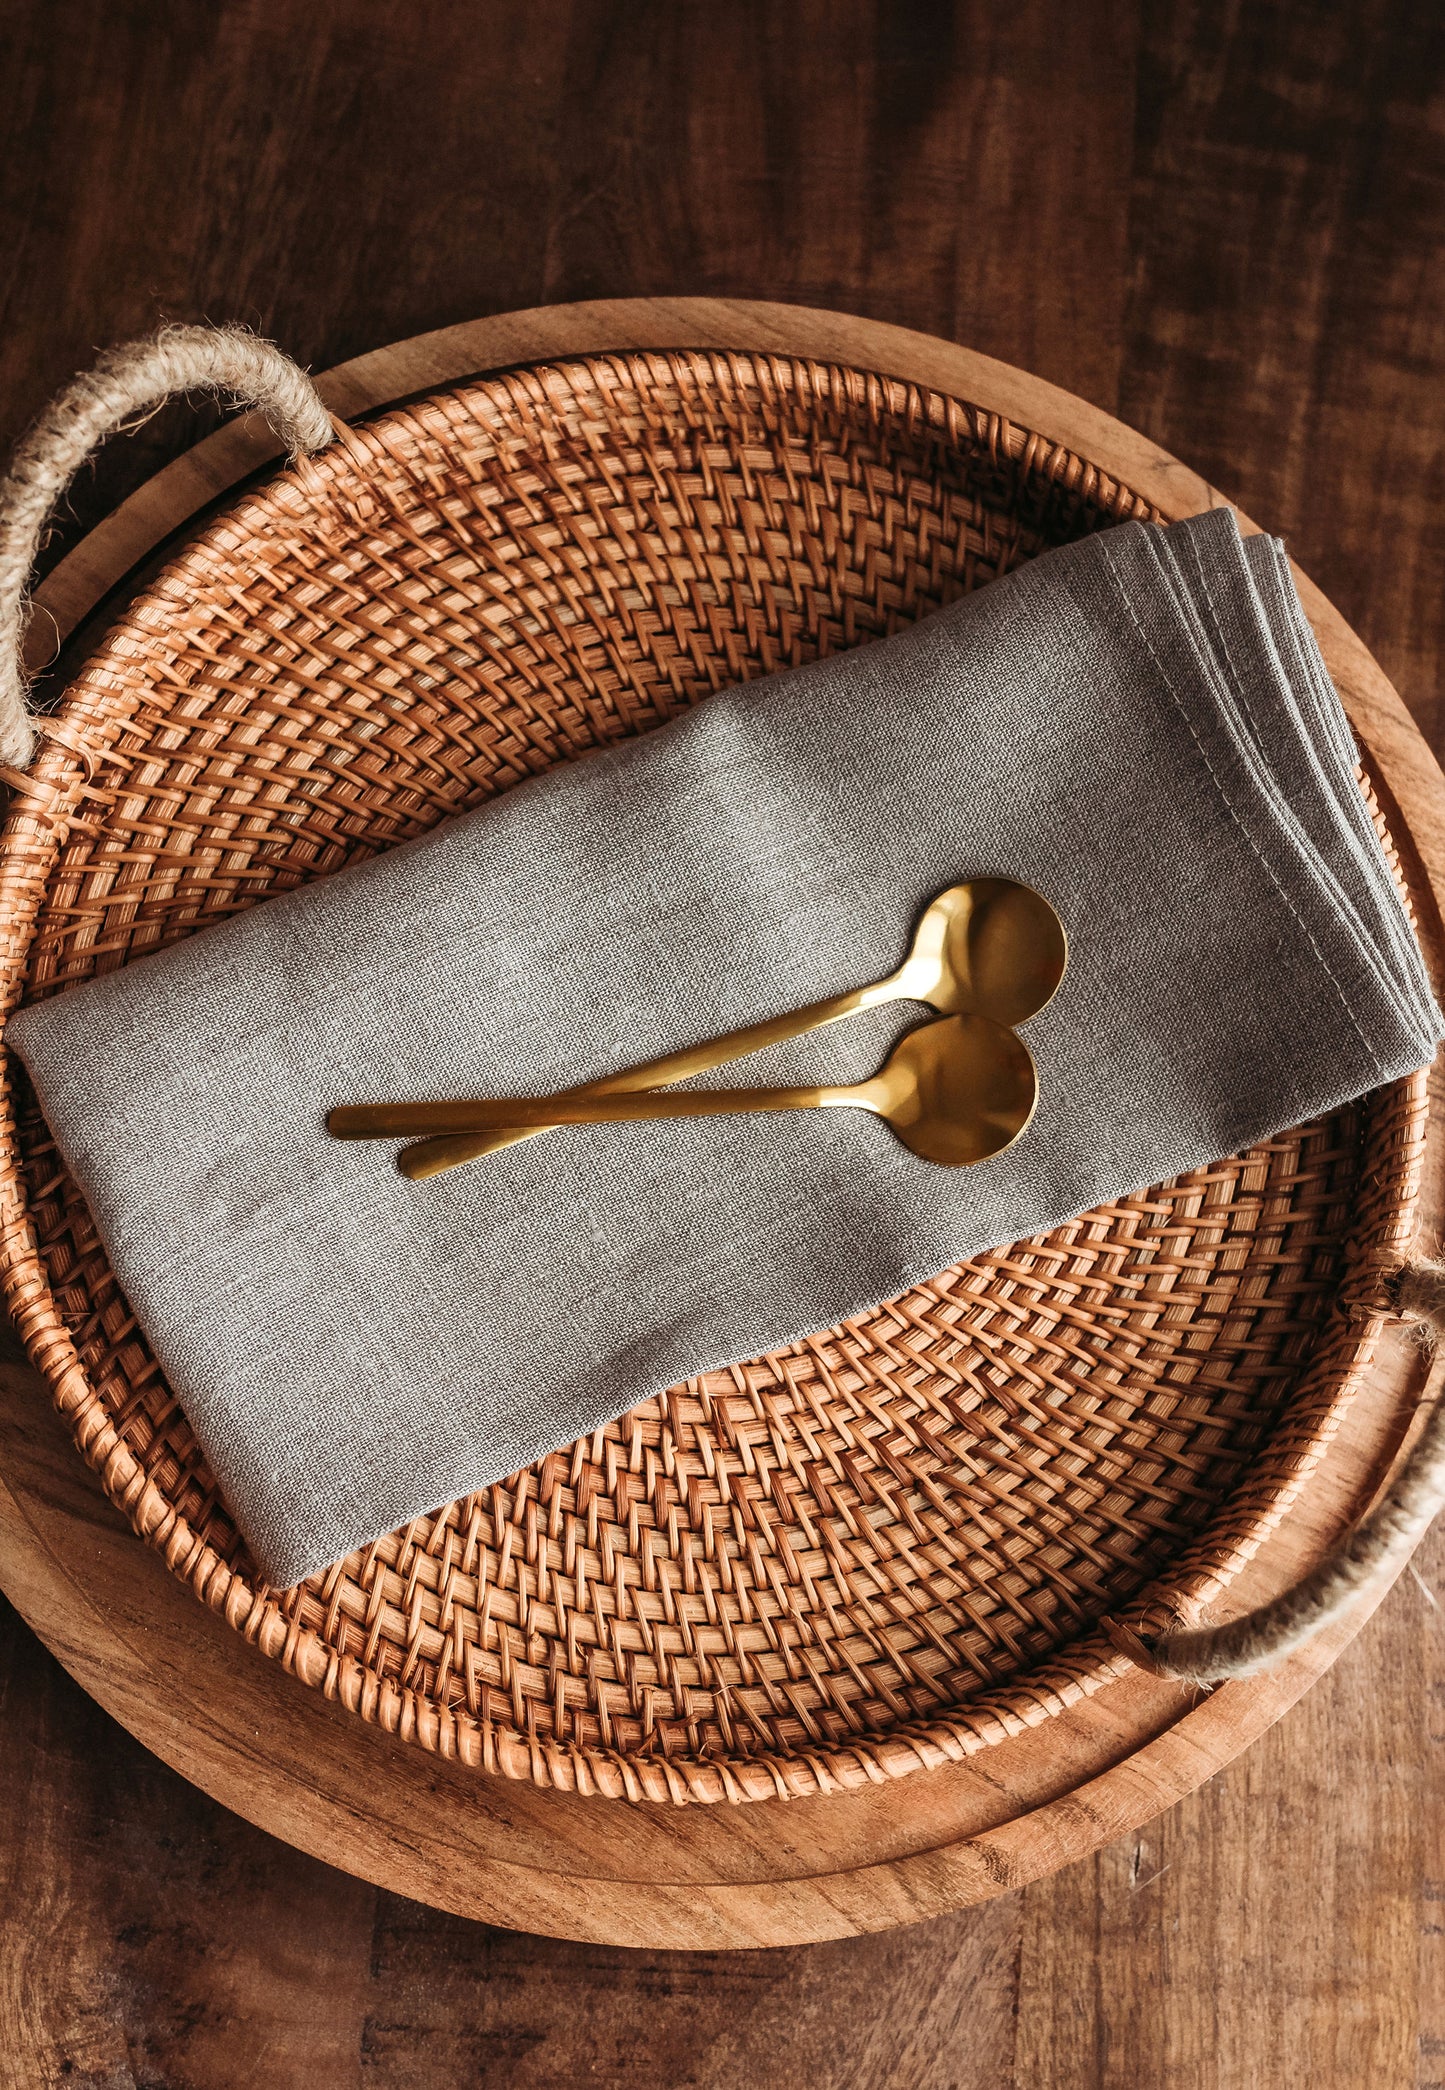 Woven Rattan Tray - Rope Handles